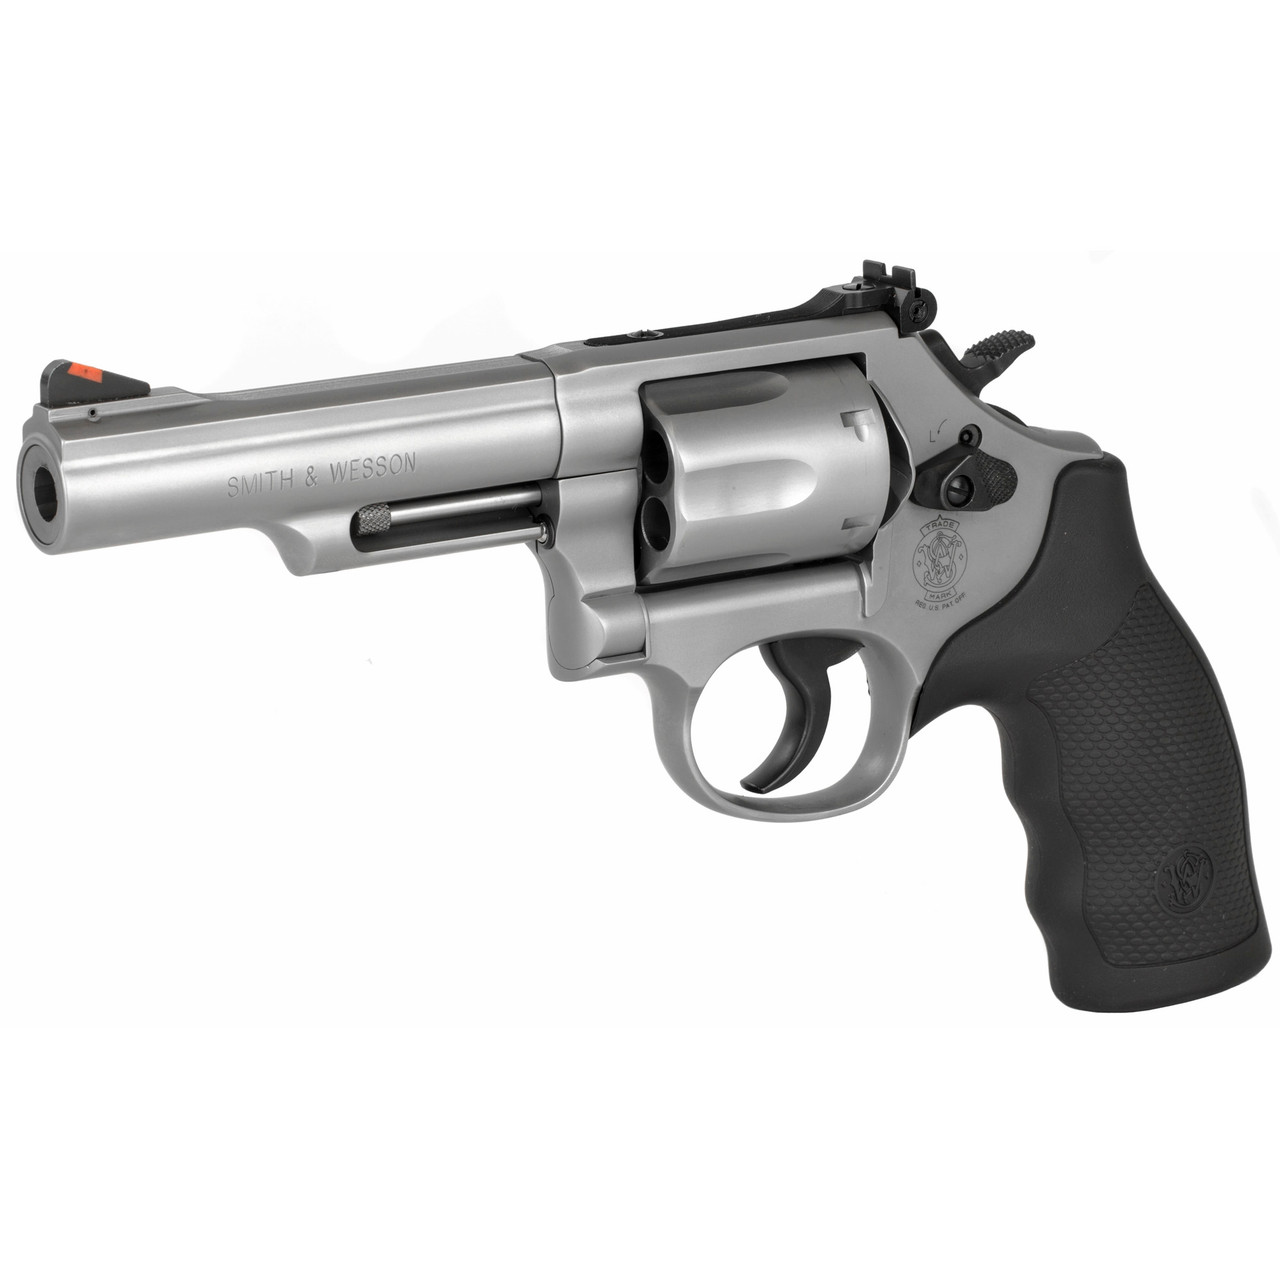 Smith & Wesson Model 66 CALIFORNIA LEGAL - .357 Mag - Stainless